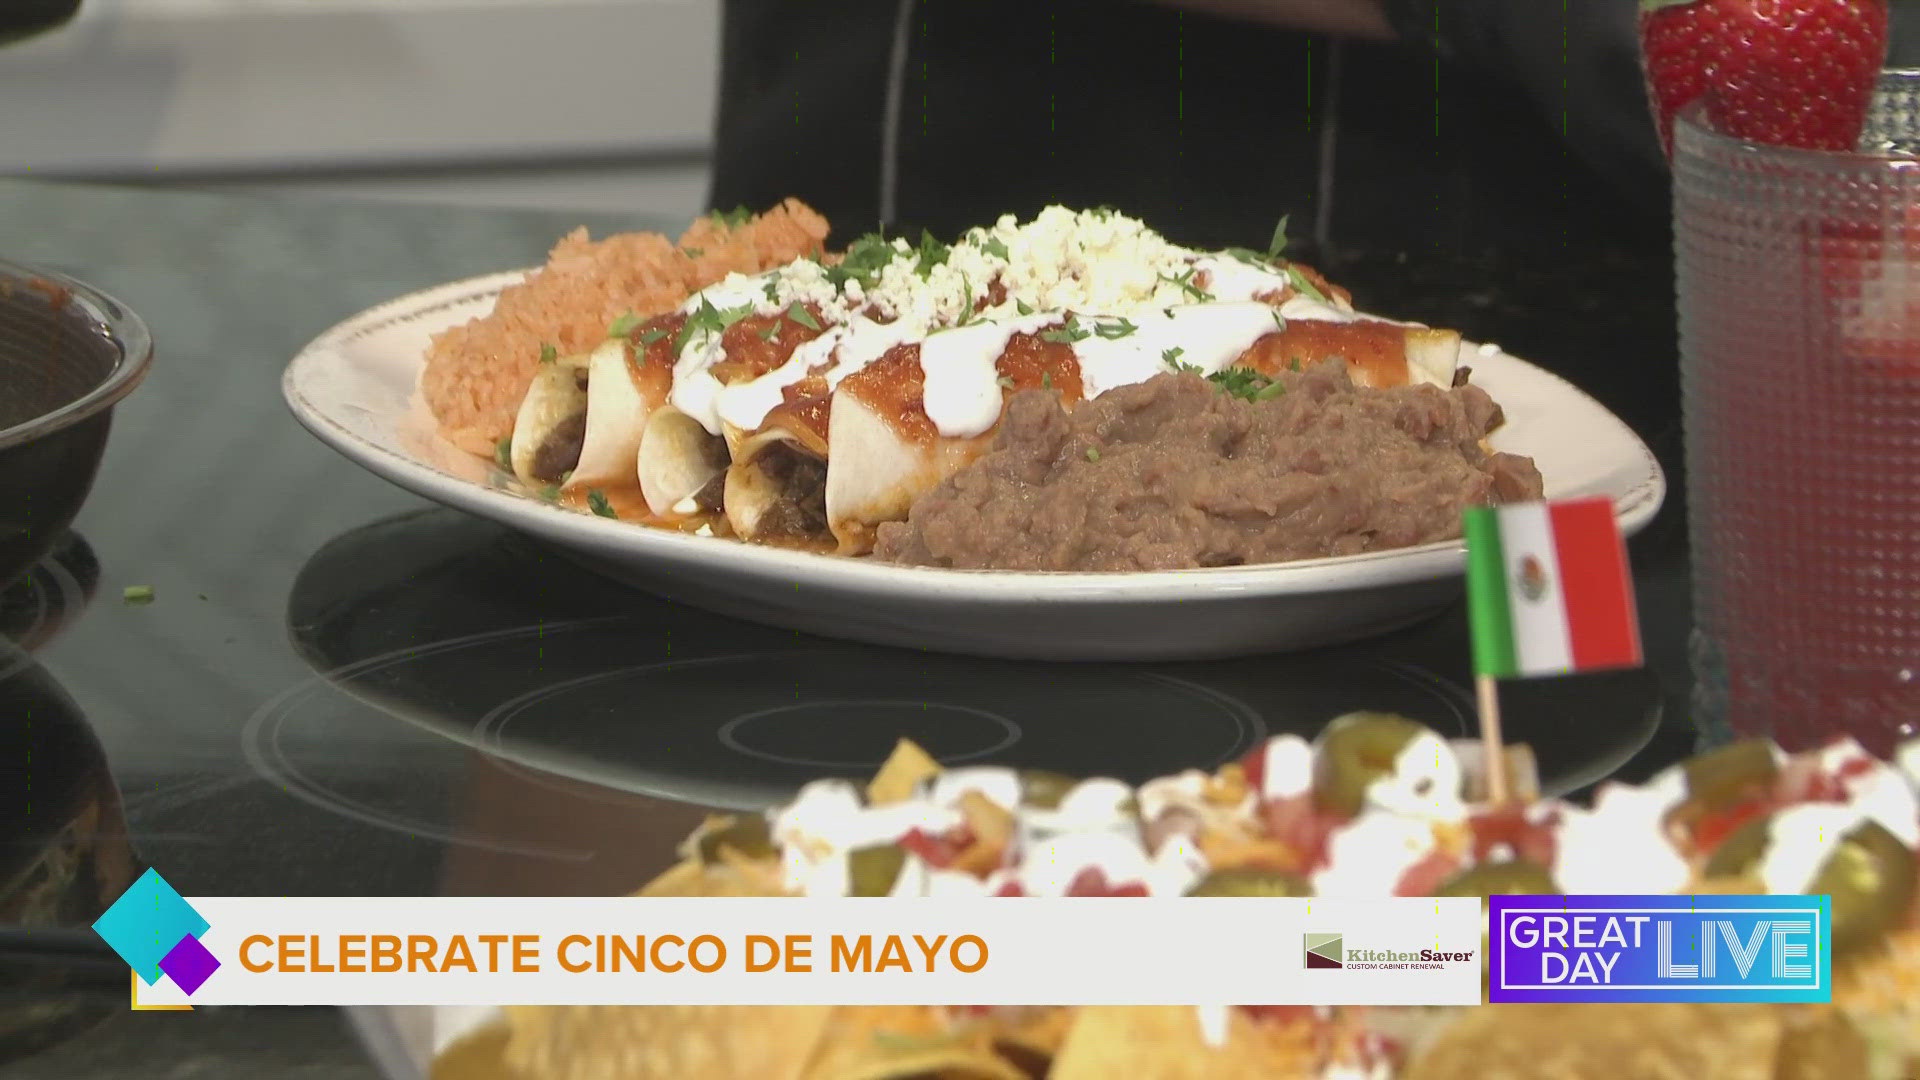 Chef Milton from Mad Beach Cantina on Madeira Beach tells us about their Cinco de Mayo celebration and shows us how to make one of their signature Mexican dishes.